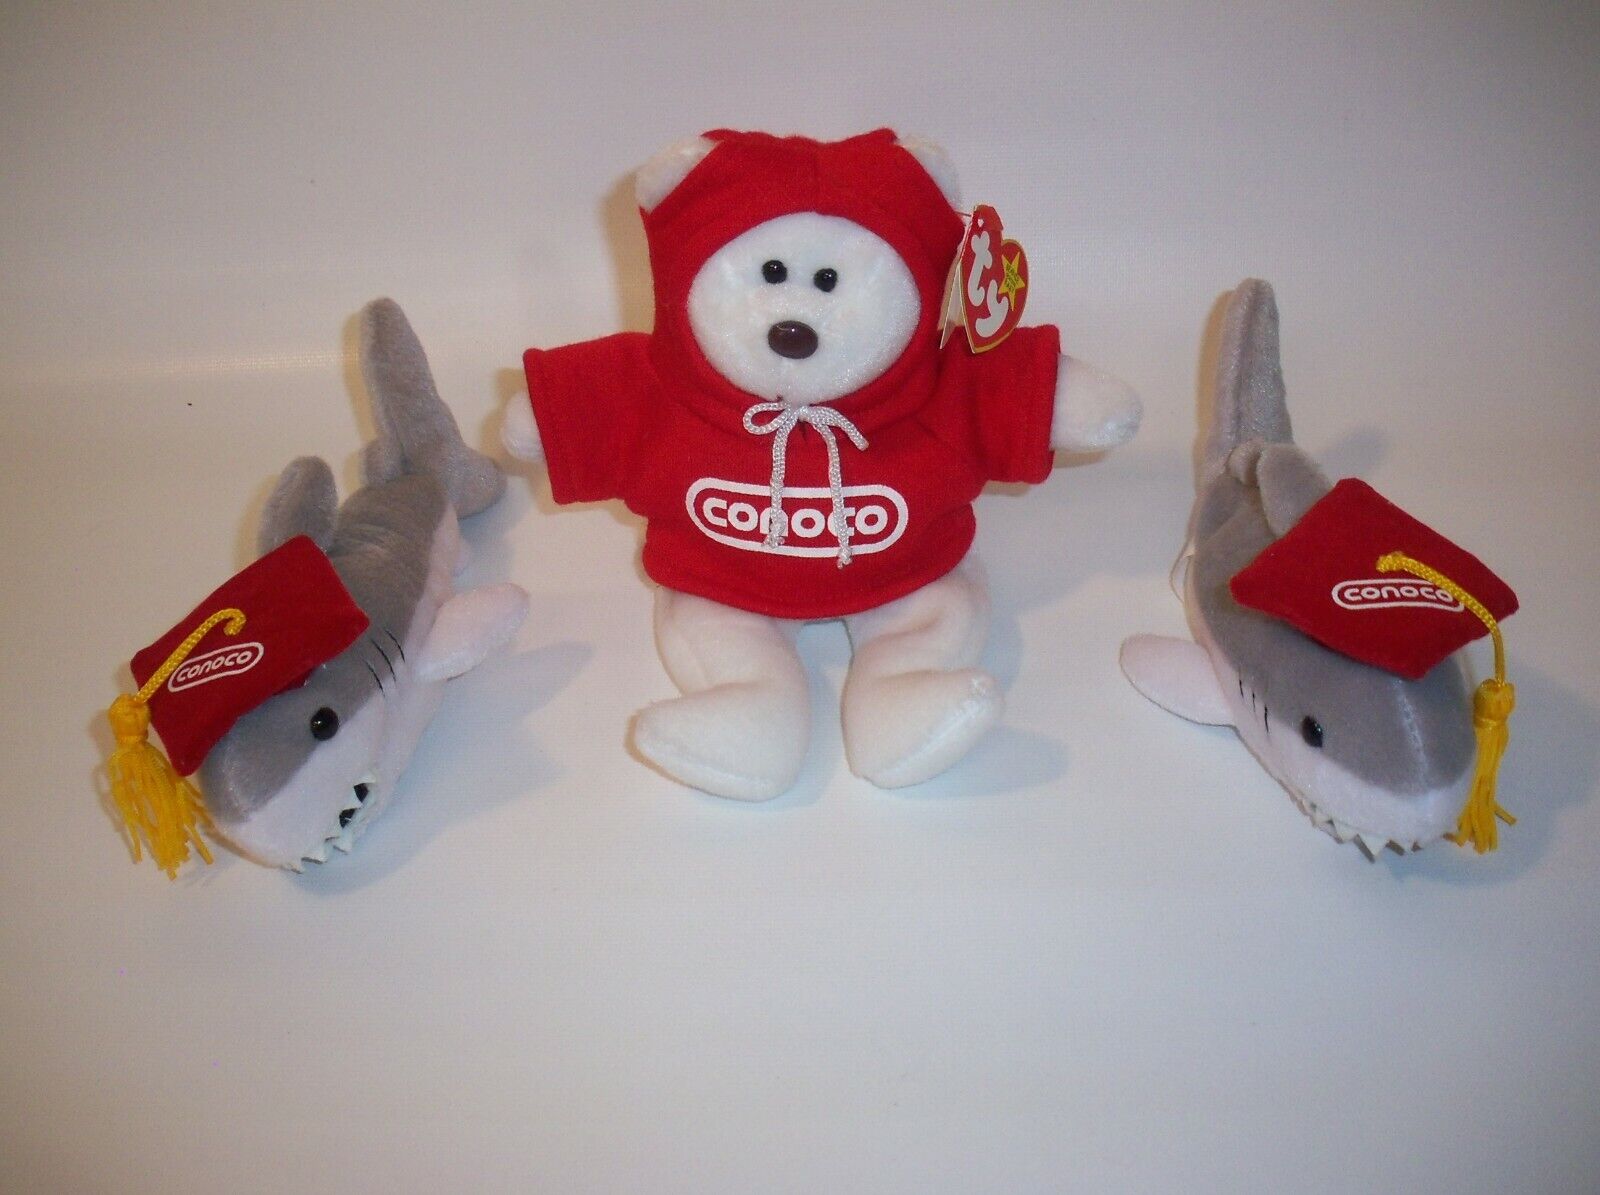 Vintage CONOCO (2)Smart Sharks (1) Beanie Baby Plush Toys Collectibles, Rare